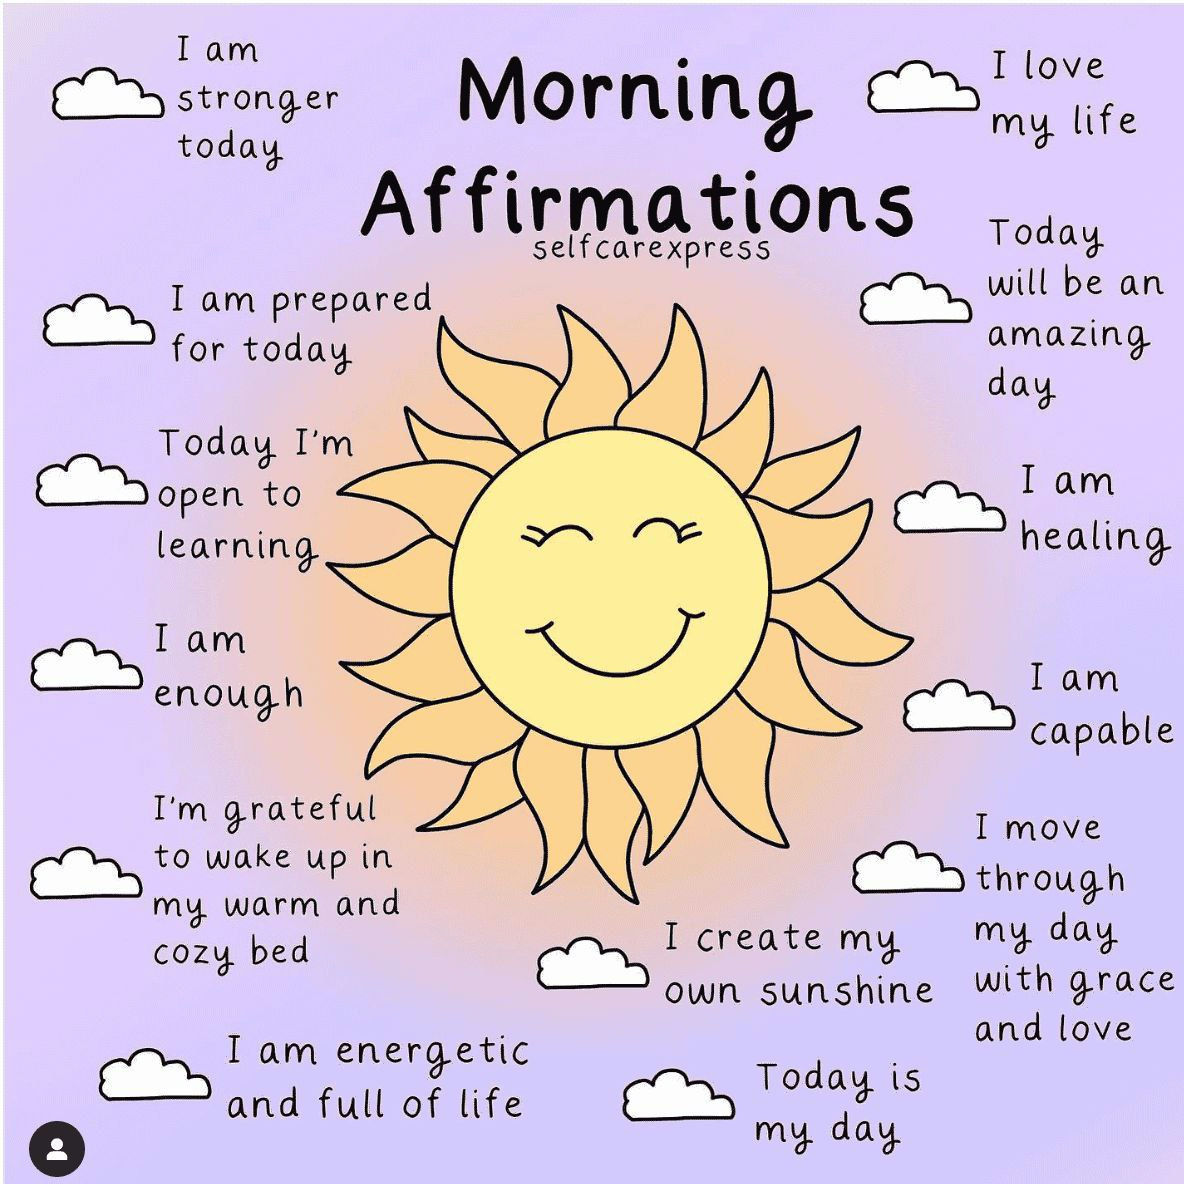 Good morning! Your affirmations should be in present tense! 
Have a great day! 
# # 